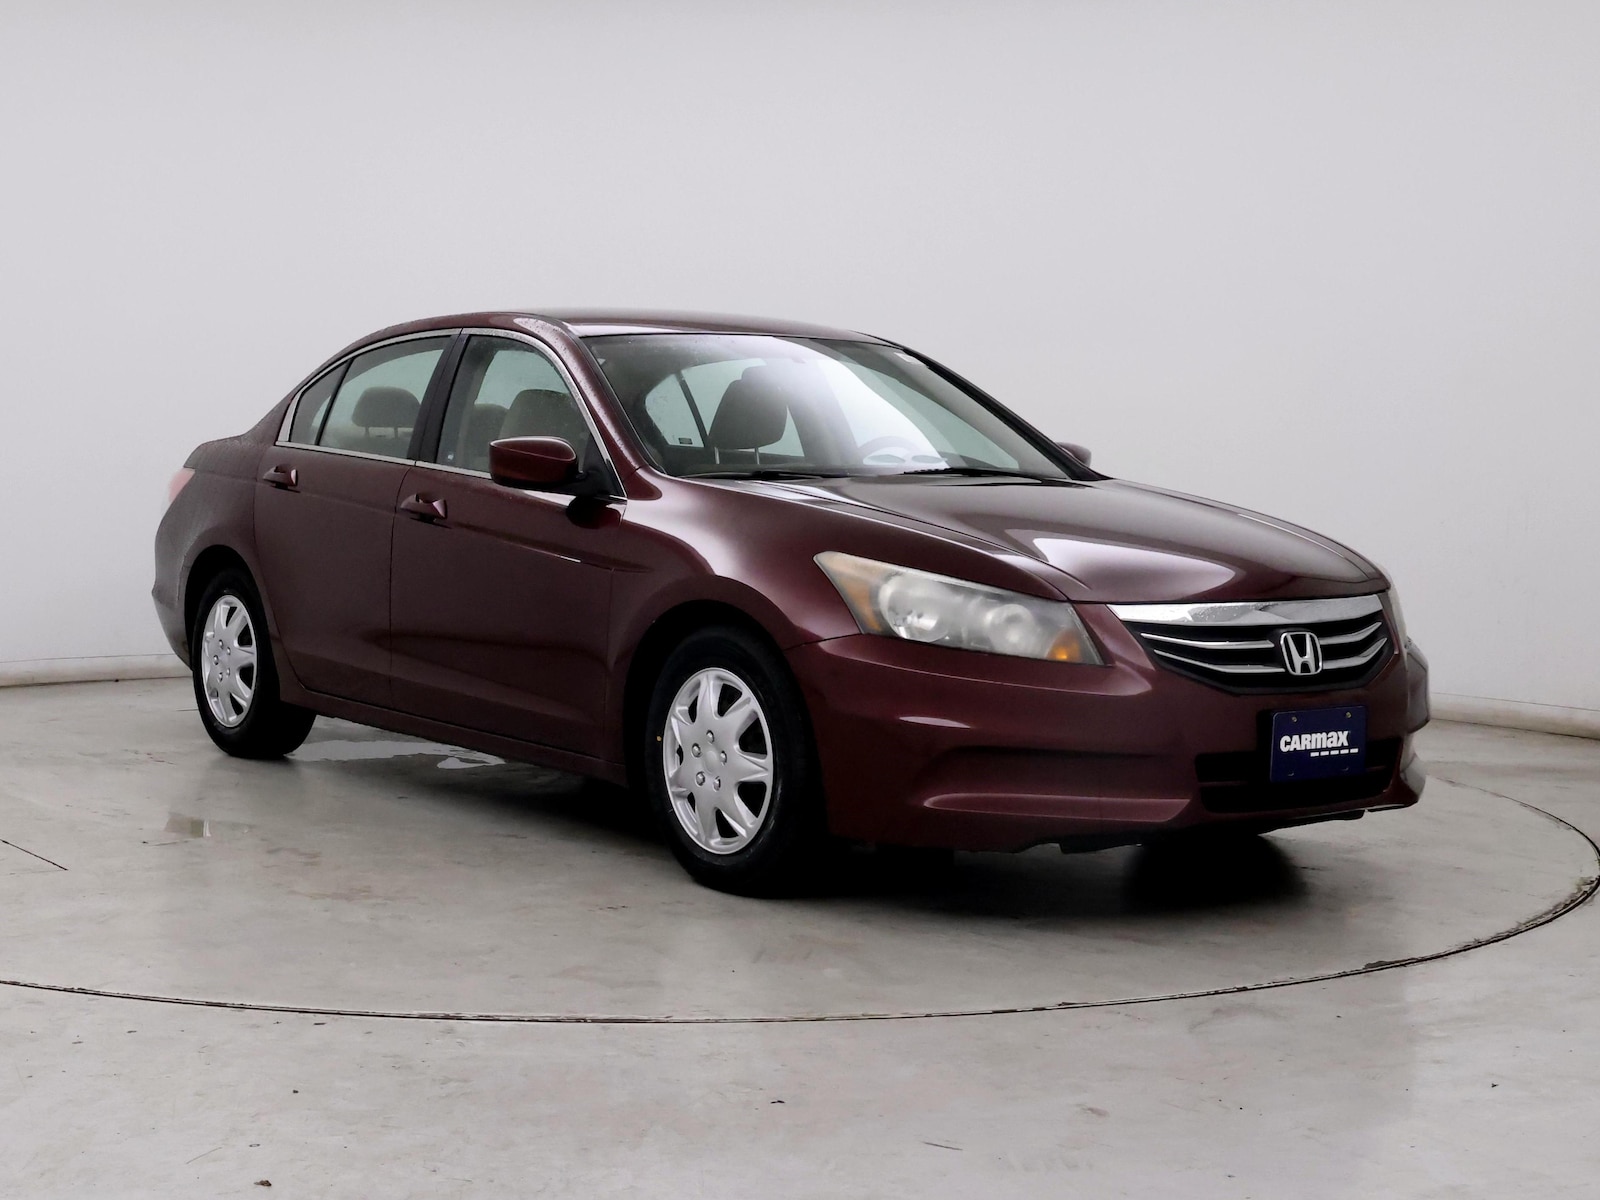 Used 2012 Honda Accord LX with VIN 1HGCP2F36CA237324 for sale in Spokane Valley, WA